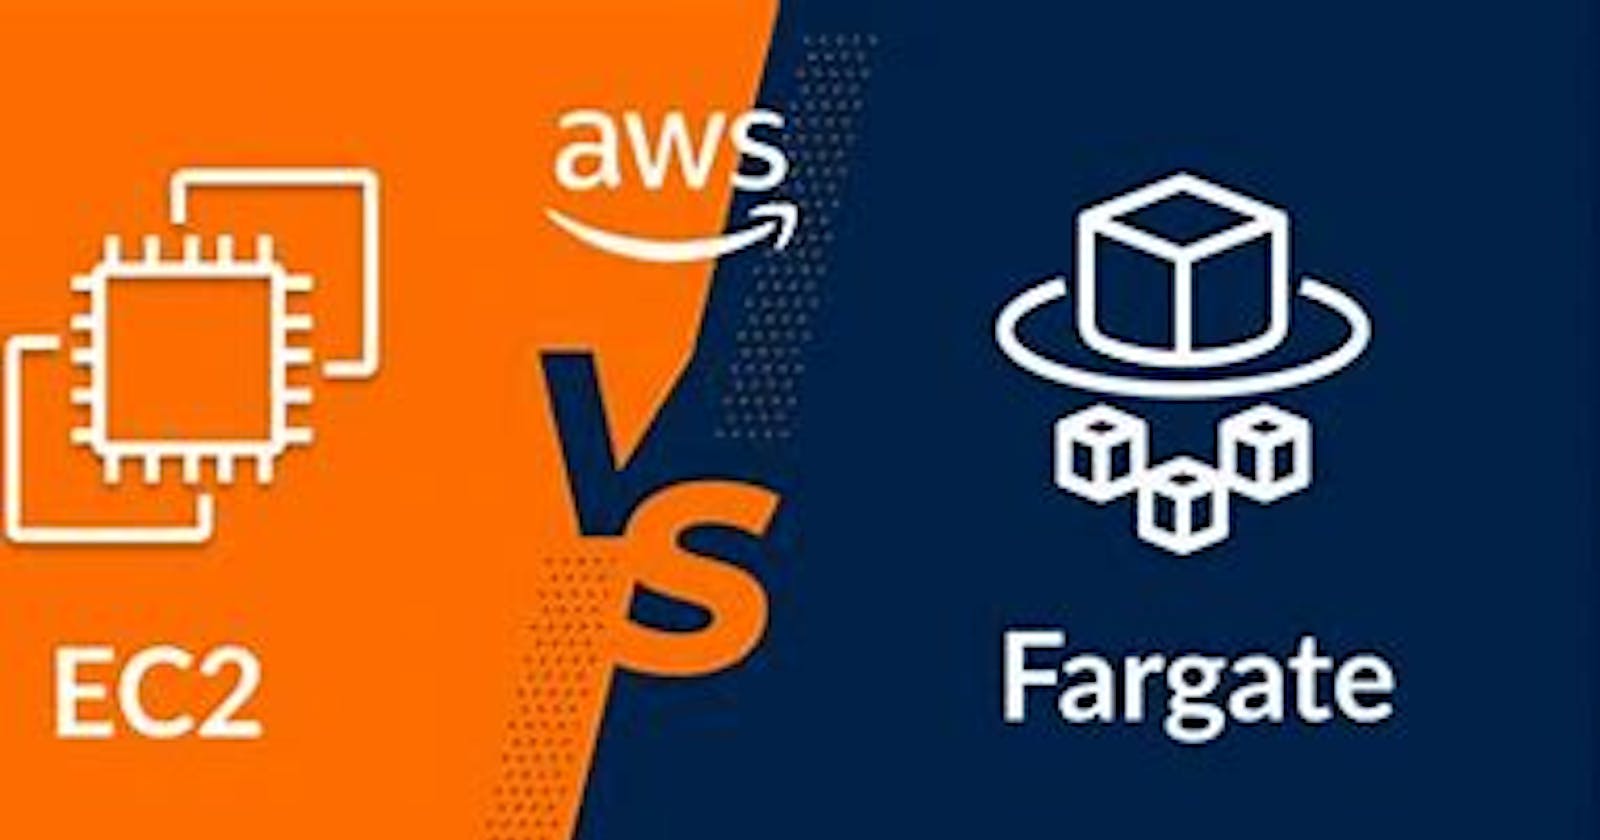 What is AWS ECS and Fargate?